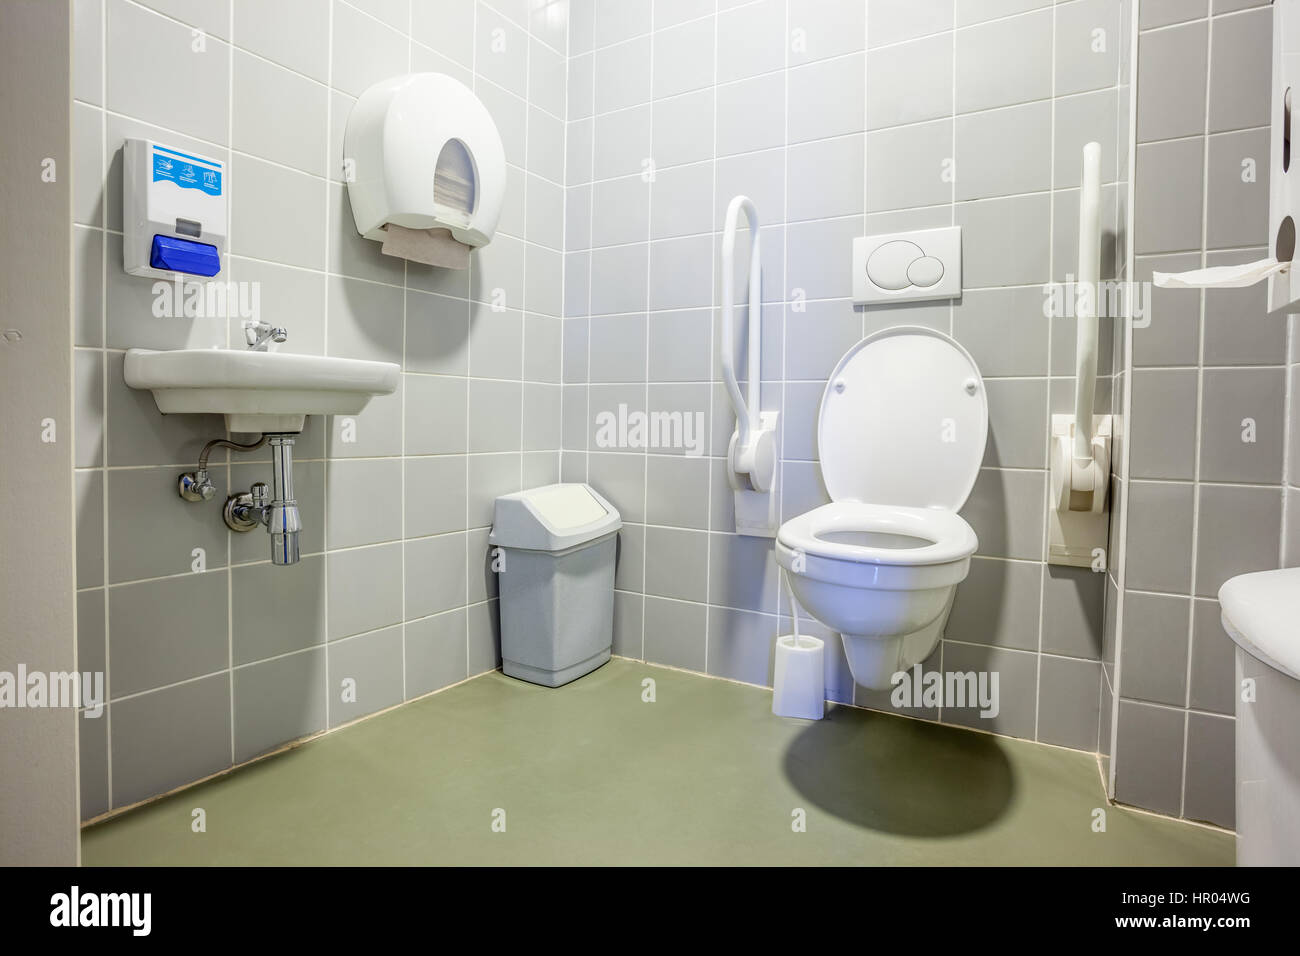 public disabled toilet in a large building Stock Photo